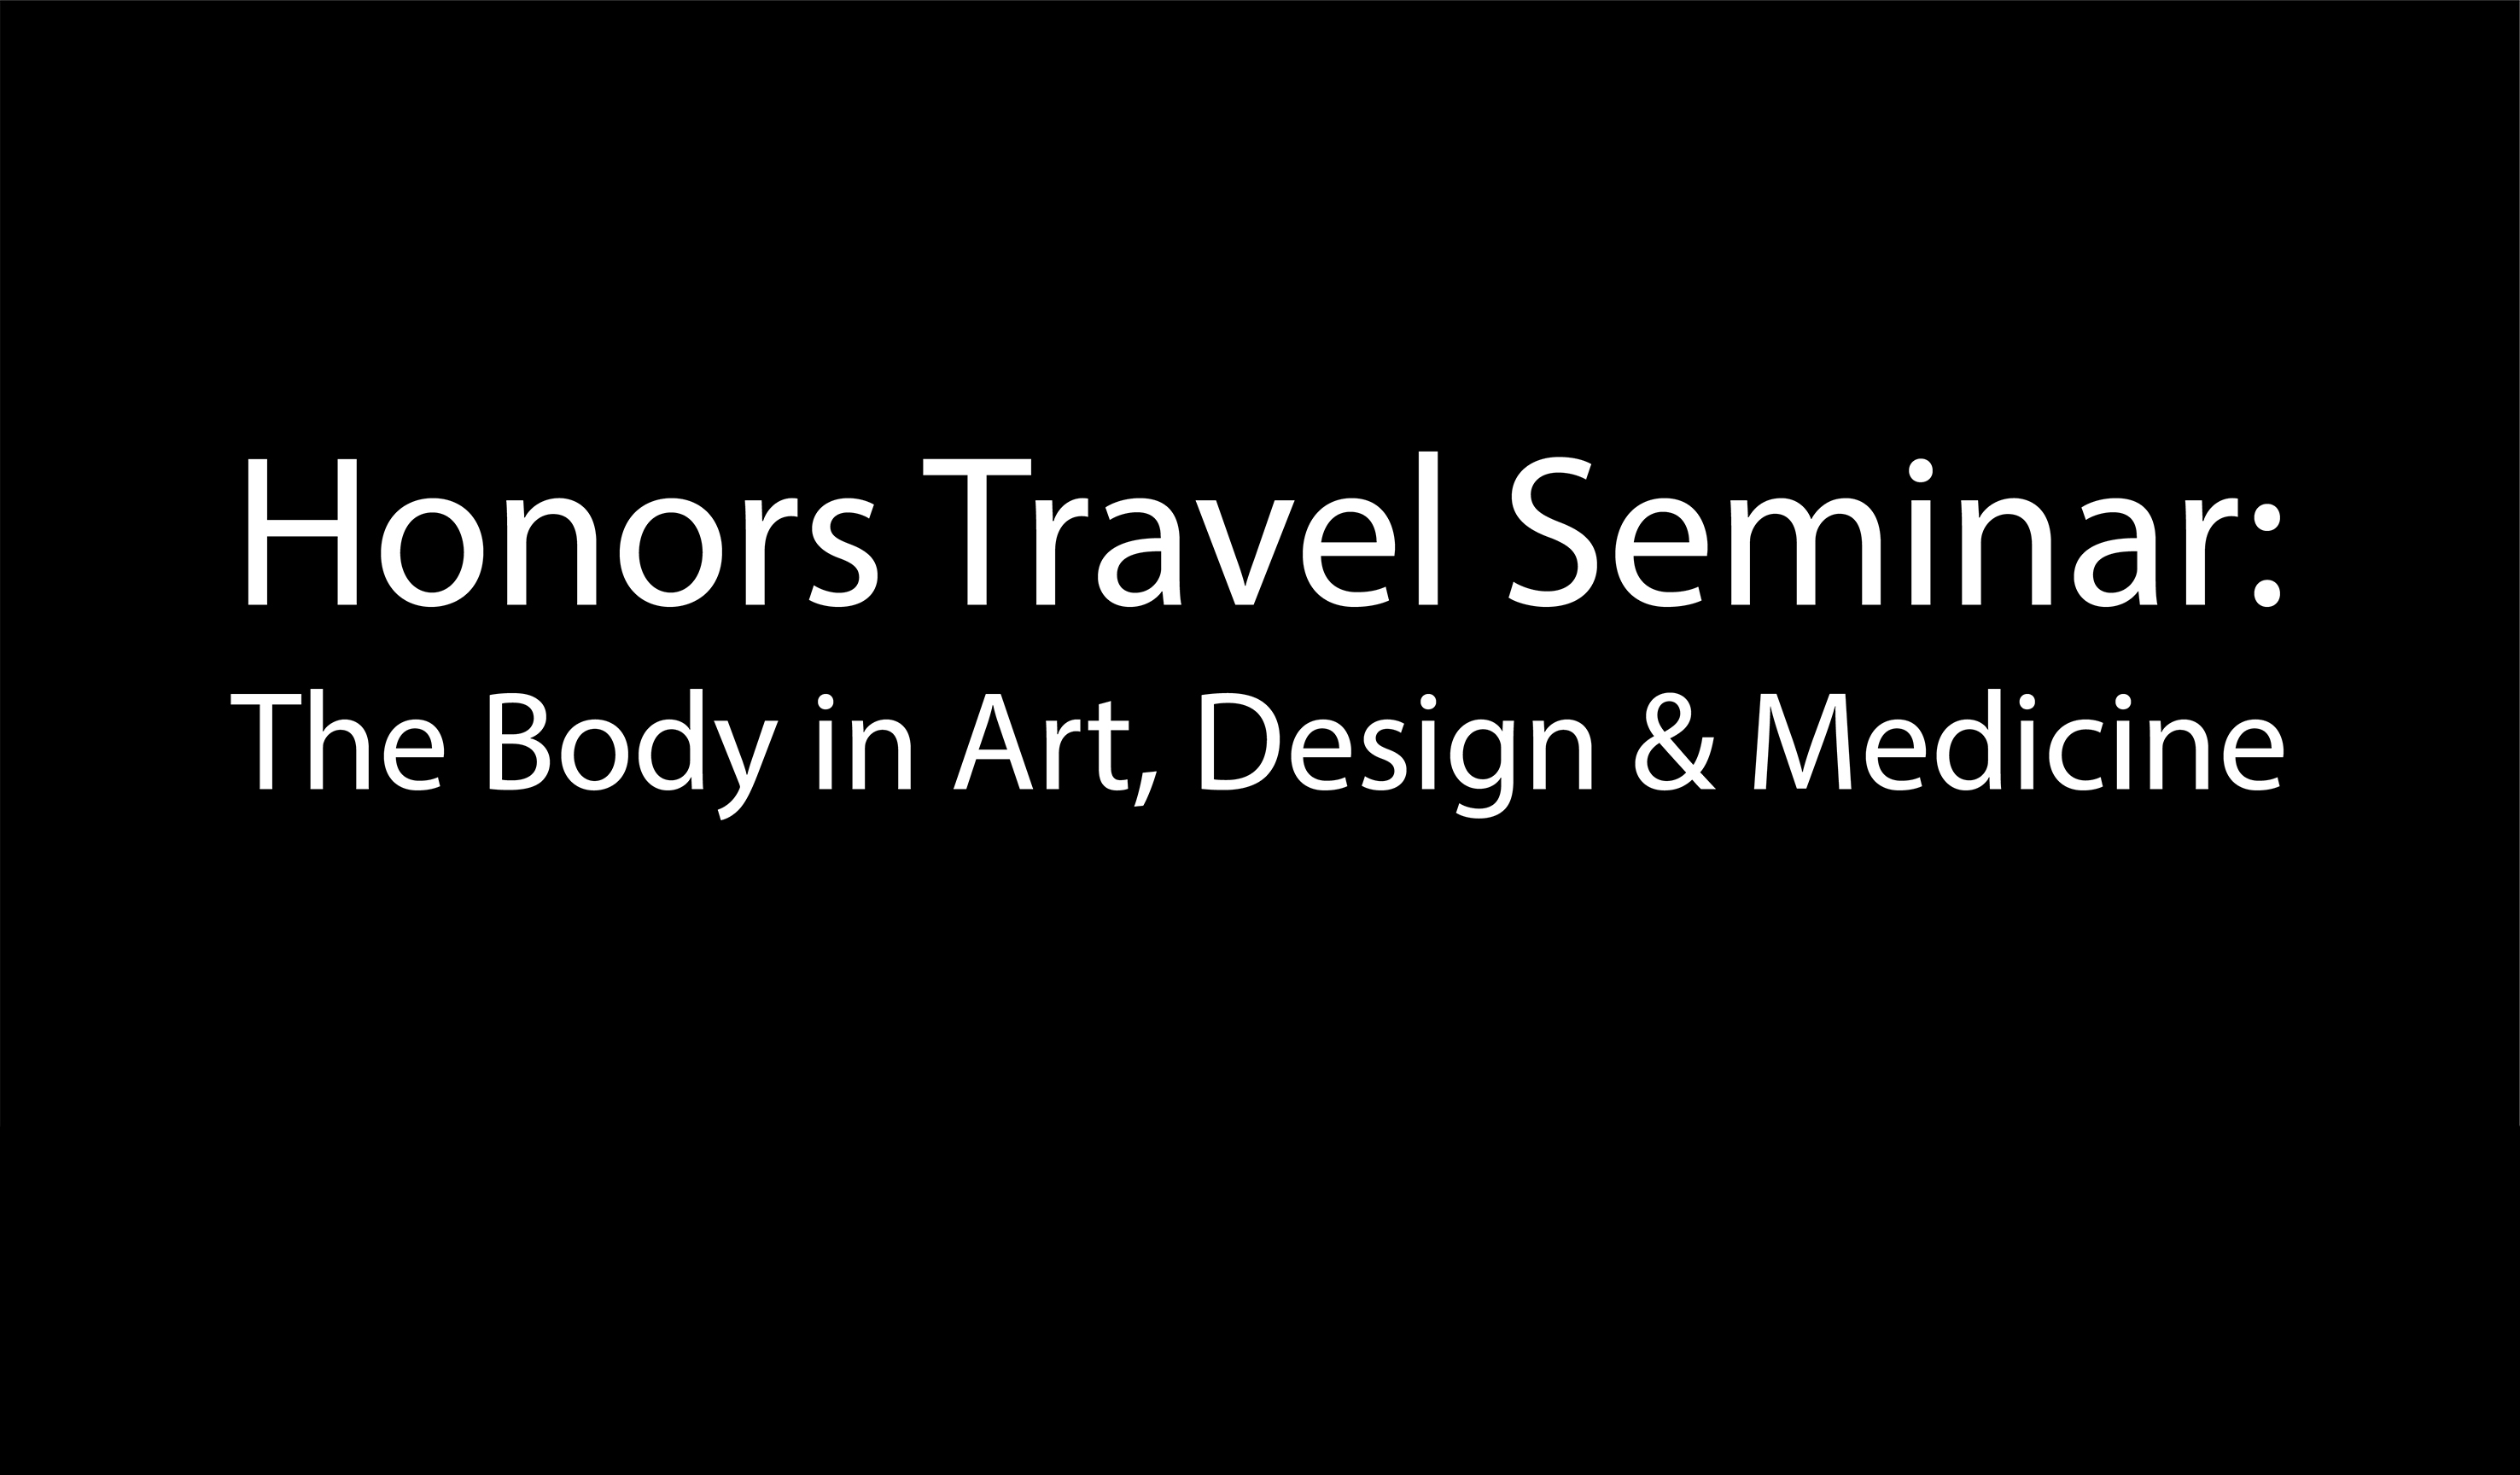 Gray background with white text: Honors Travel Seminar: The Body in Art, Design, and Medicine